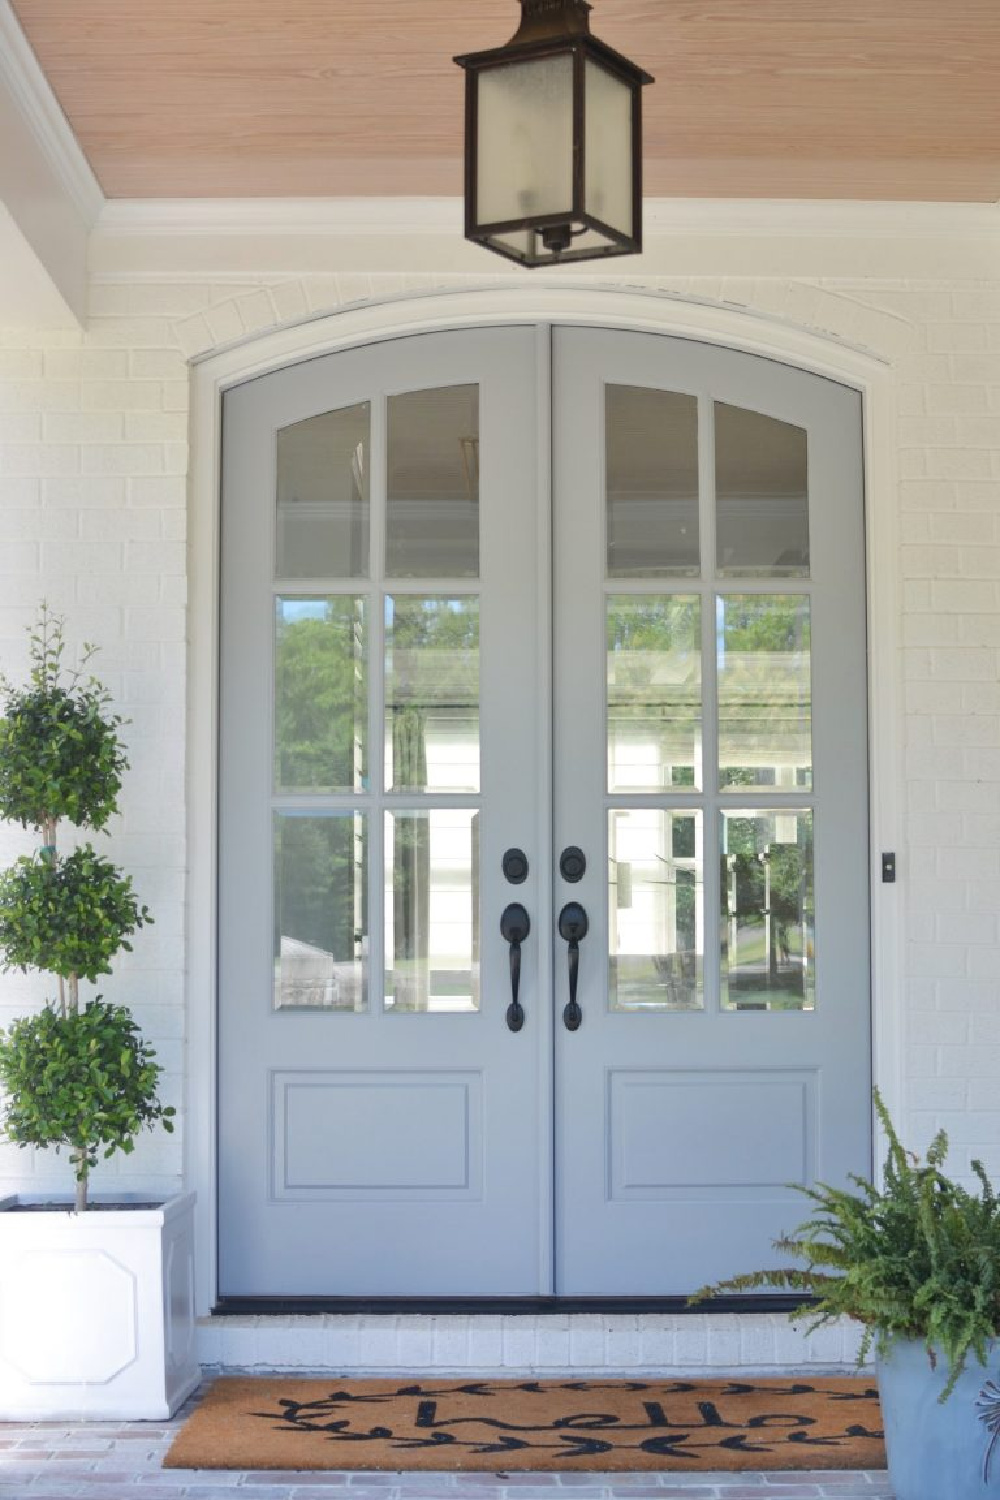 Extra White (Sherwin Williams) paint on house exterior with SW Uncertain Gray on doors and trim - ChrissyMarieBlog. #swextrawhite #whitehousepaintcolors #whiteexteriorcolors